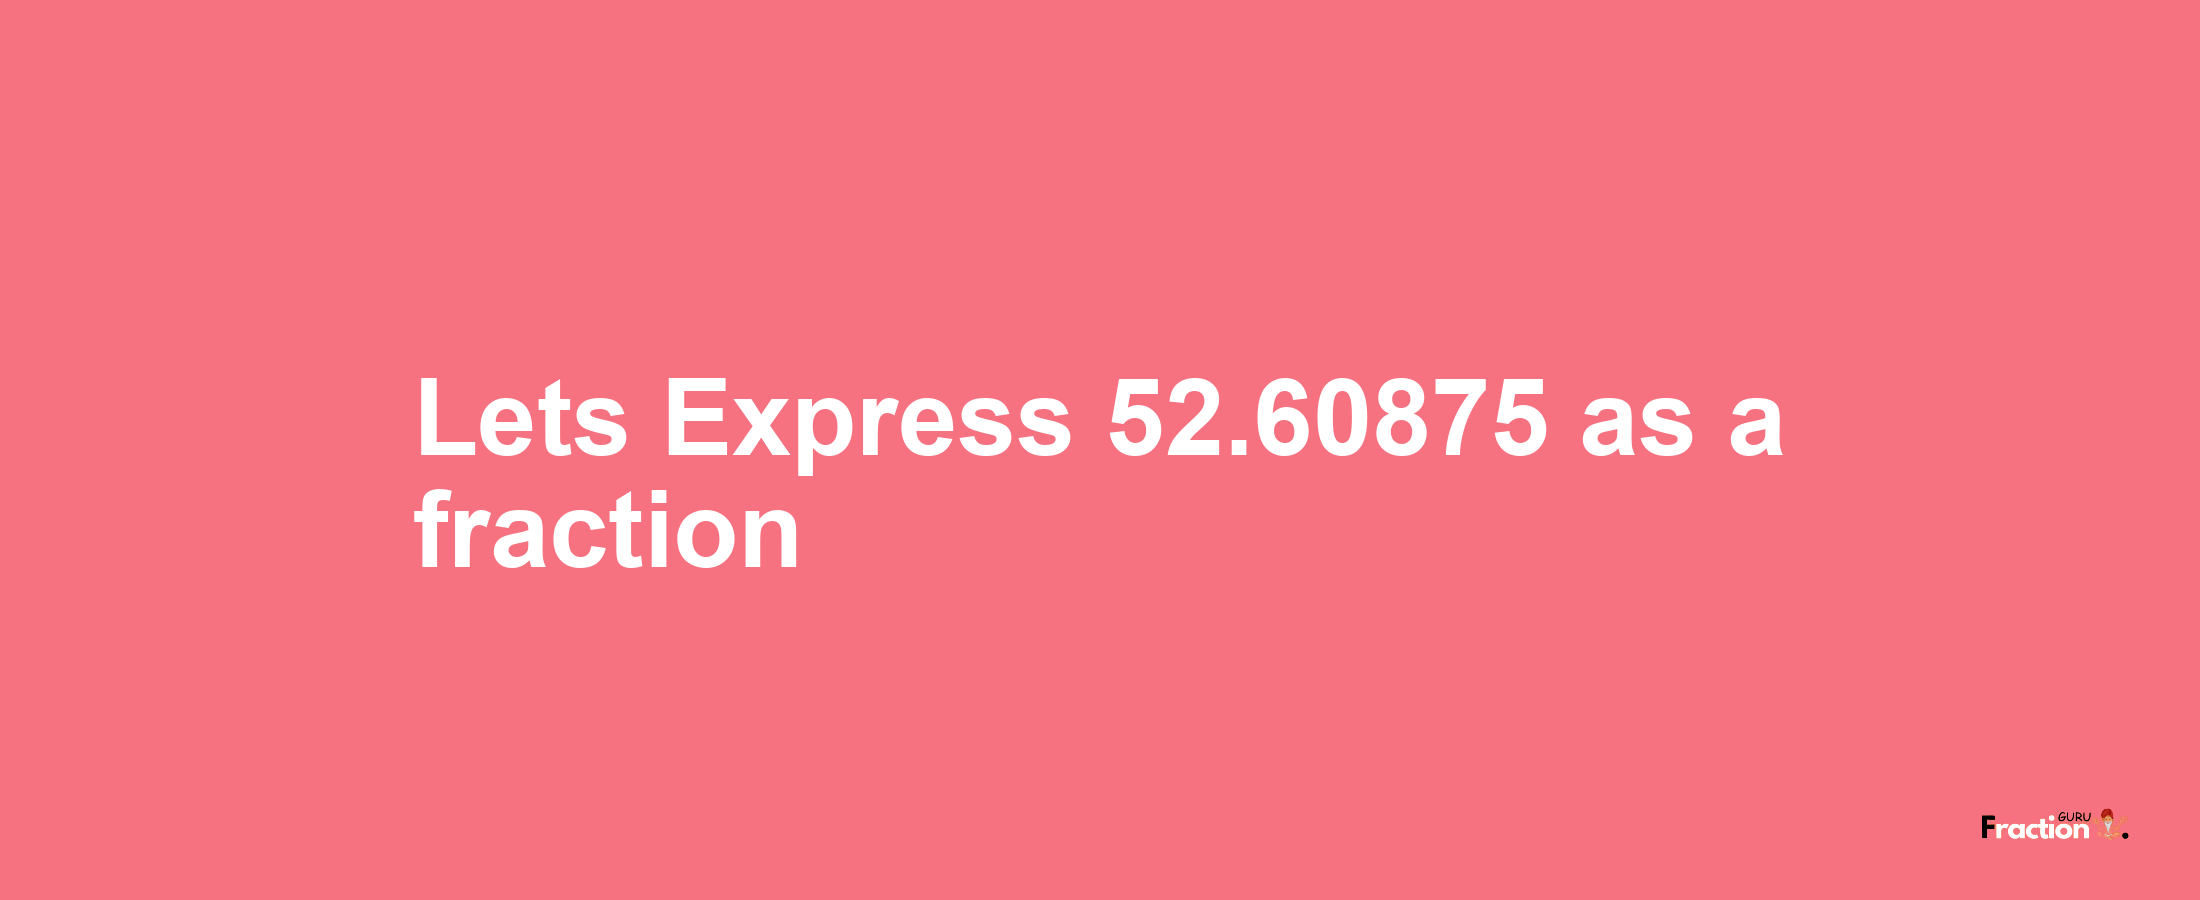 Lets Express 52.60875 as afraction